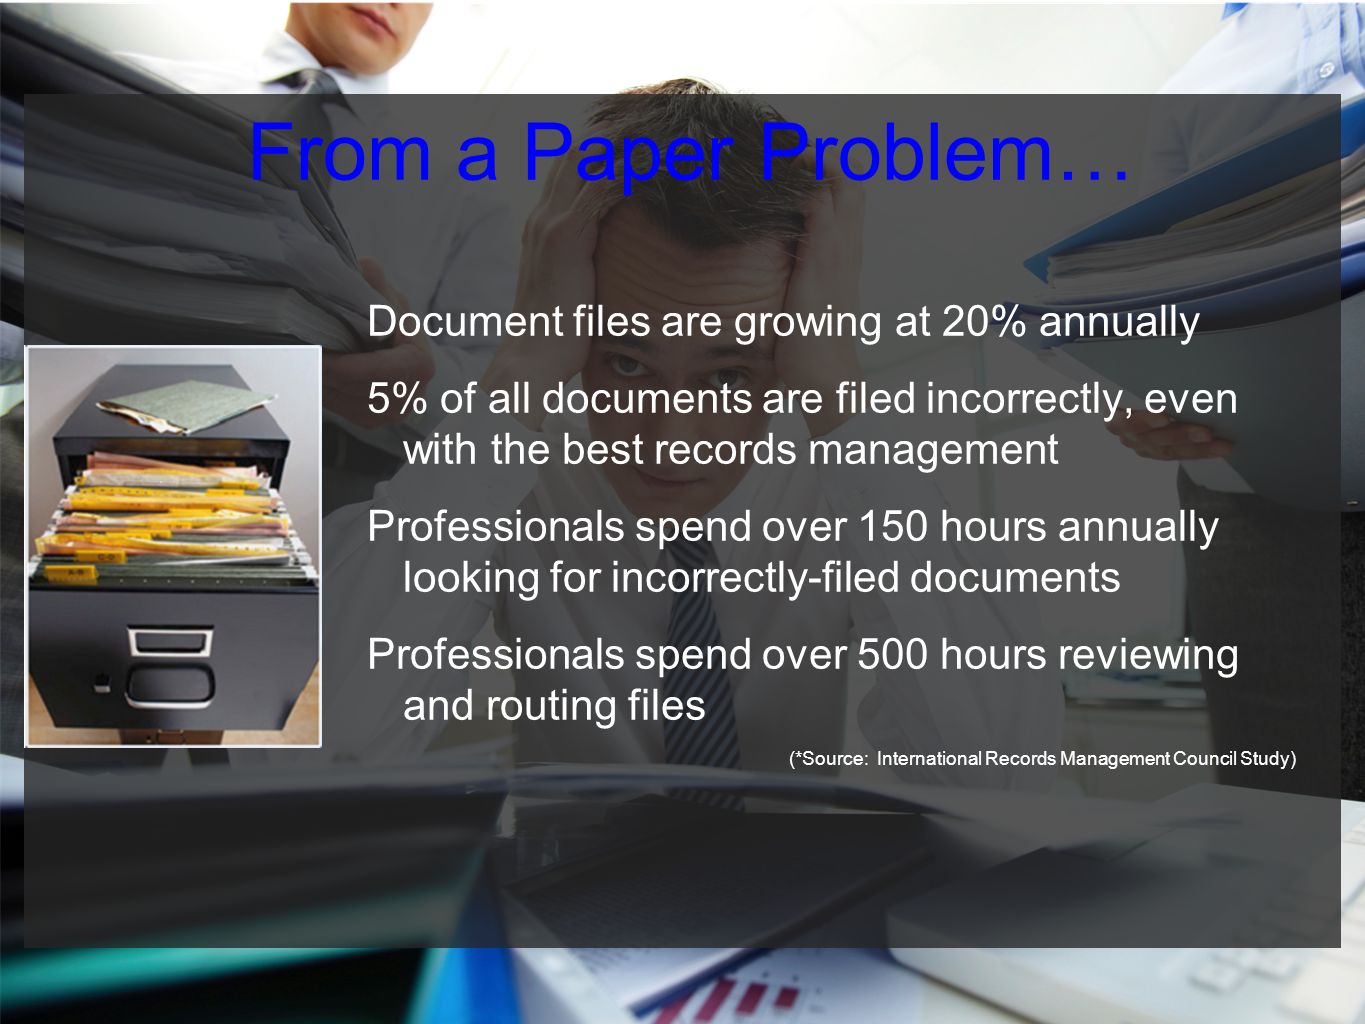 From a Paper Problem… Document files are growing at 20% annually 5% of all documents are filed incorrectly, even with the best records management Professionals spend over 150 hours annually looking for incorrectly-filed documents Professionals spend over 500 hours reviewing and routing files (*Source: International Records Management Council Study)